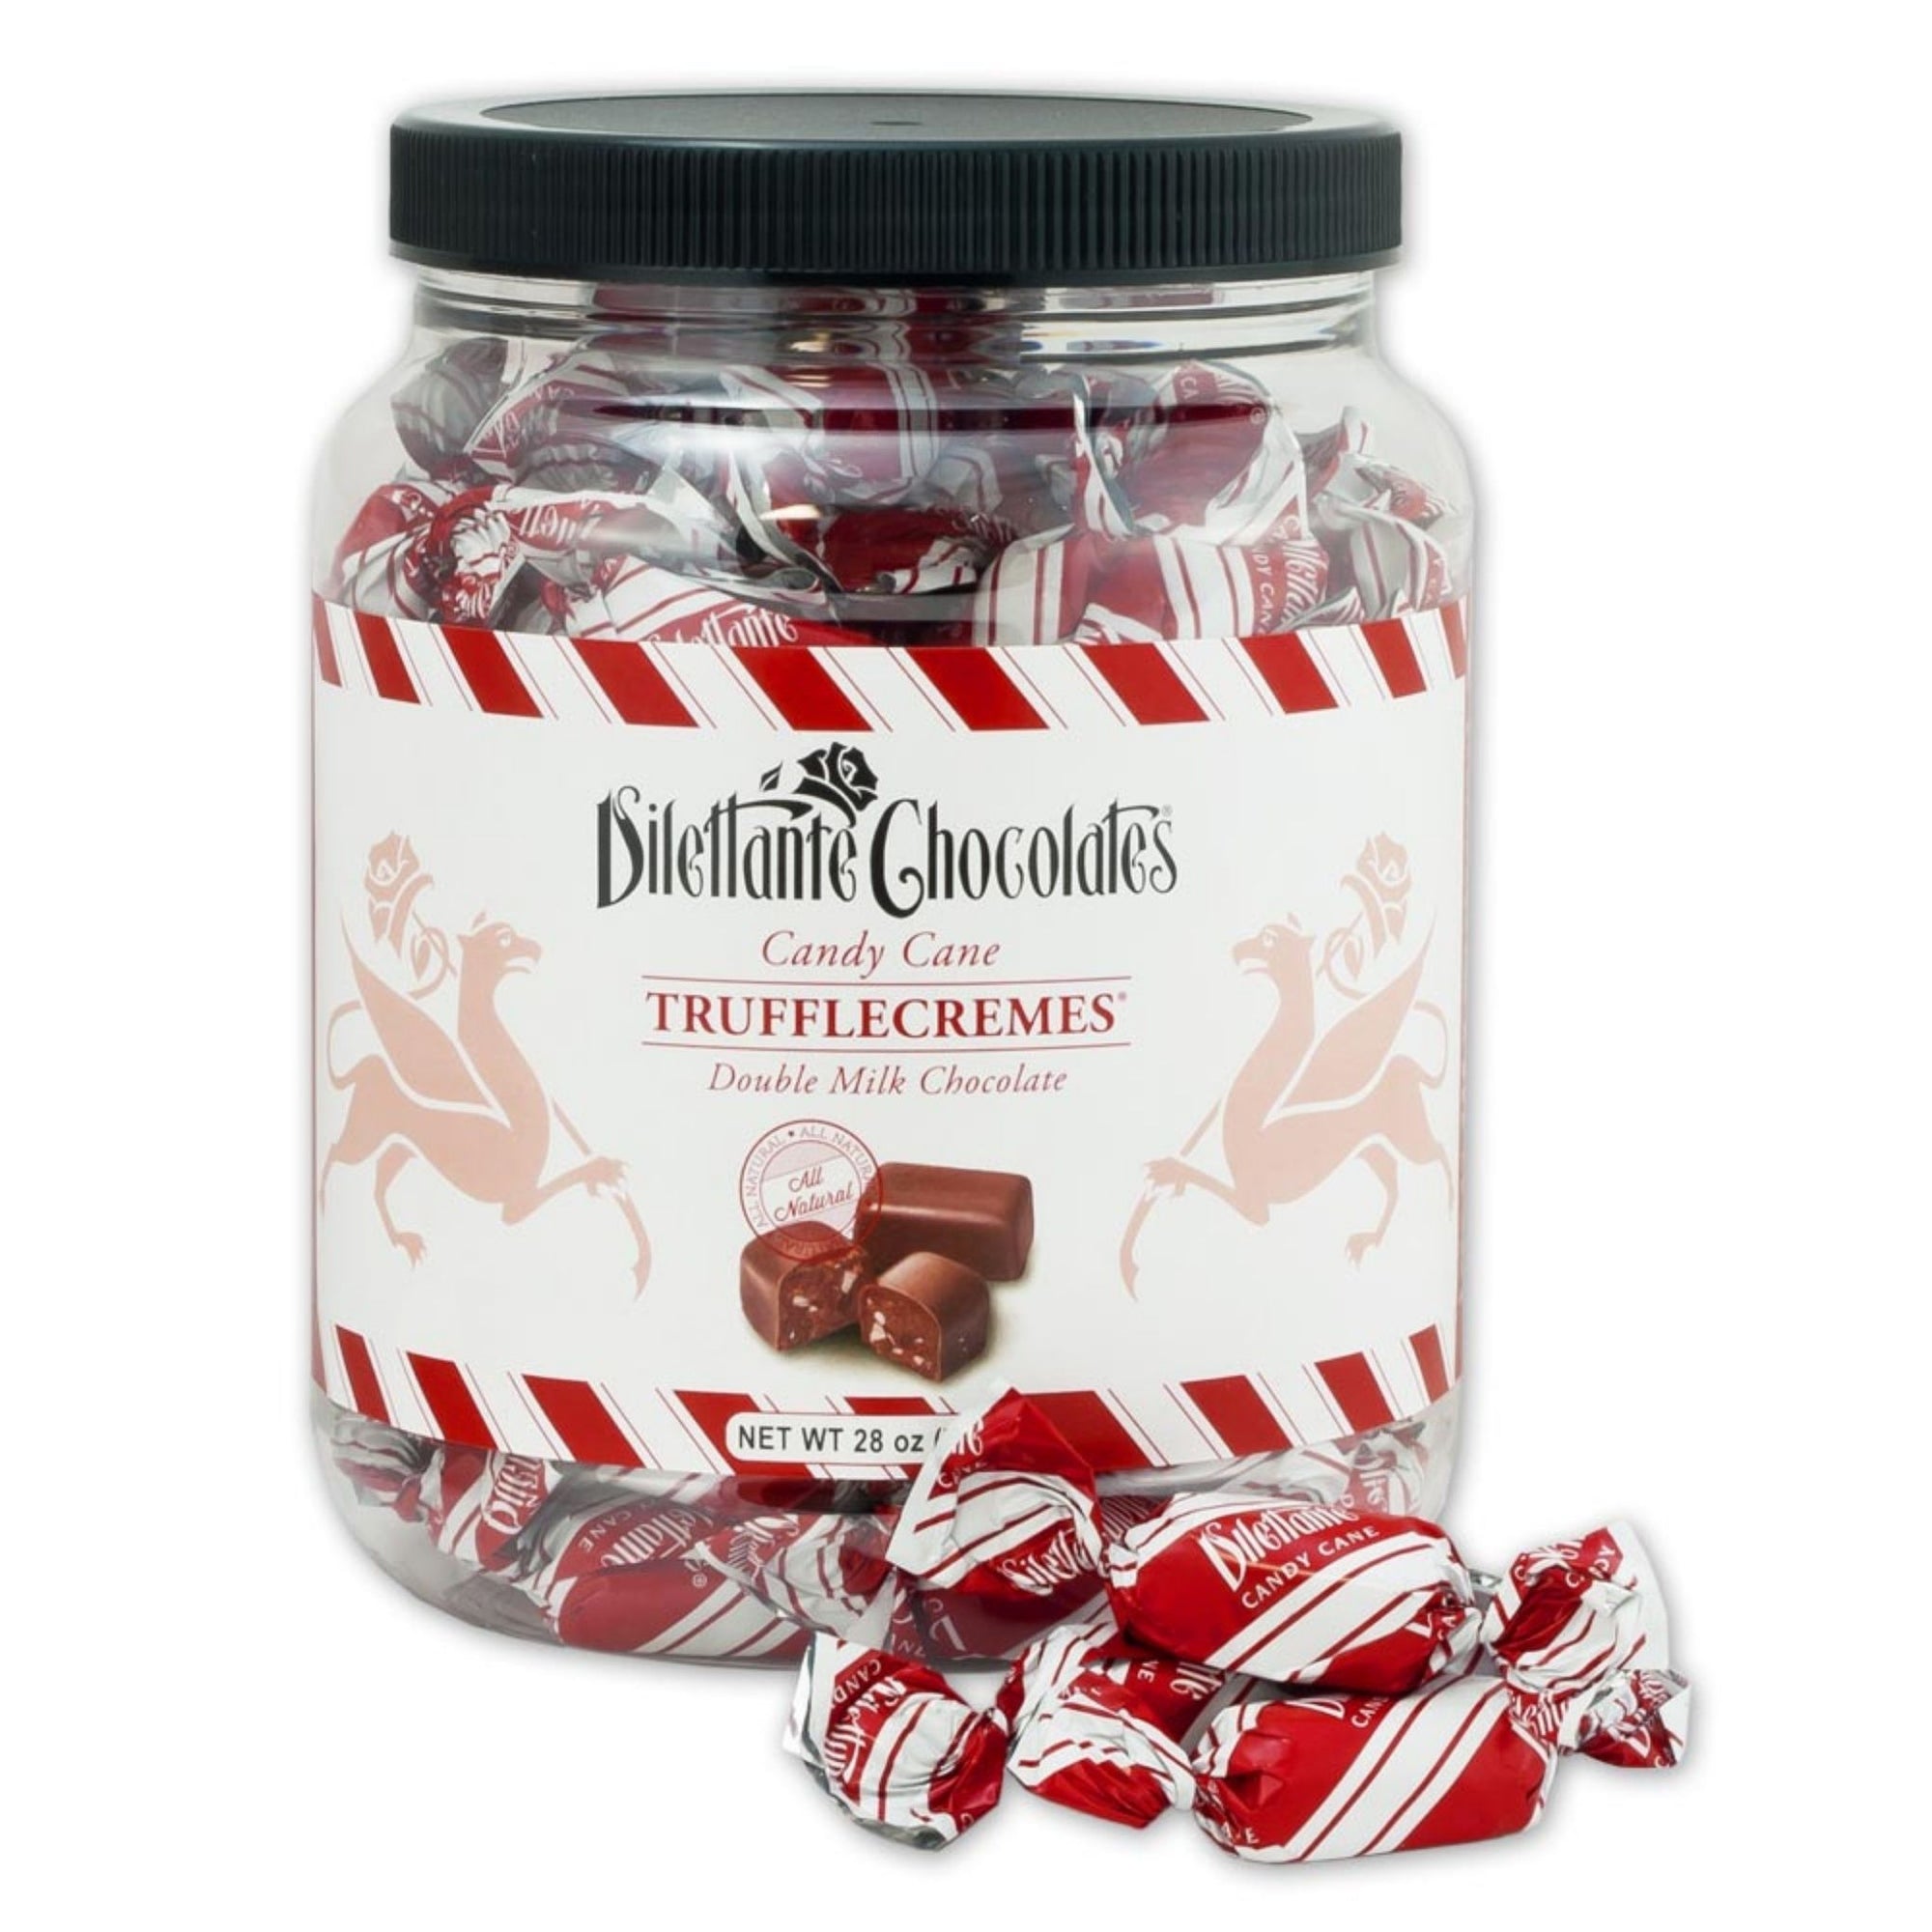 Dilettante Chocolates 28-Ounce Jar of Dilettante's Peppermint TruffleCremes Featuring Milk Chocolate and All Natural Candy Can Pieces